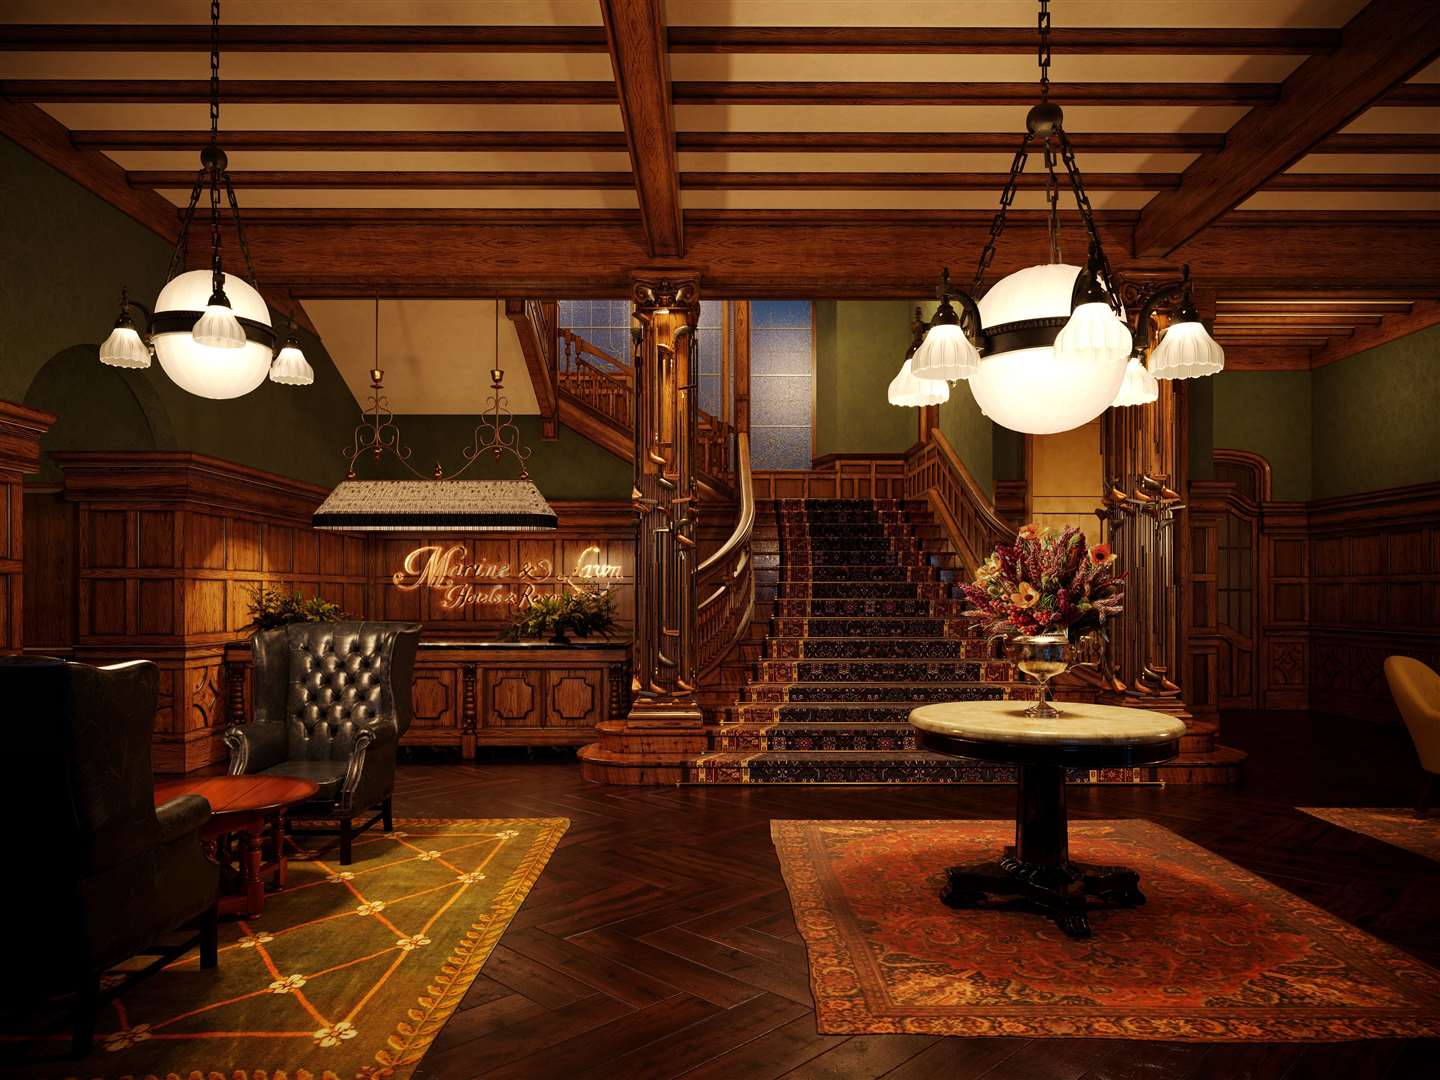 The lobby houses existing wood panelling as the design aims to restore and celebrate the original design features.